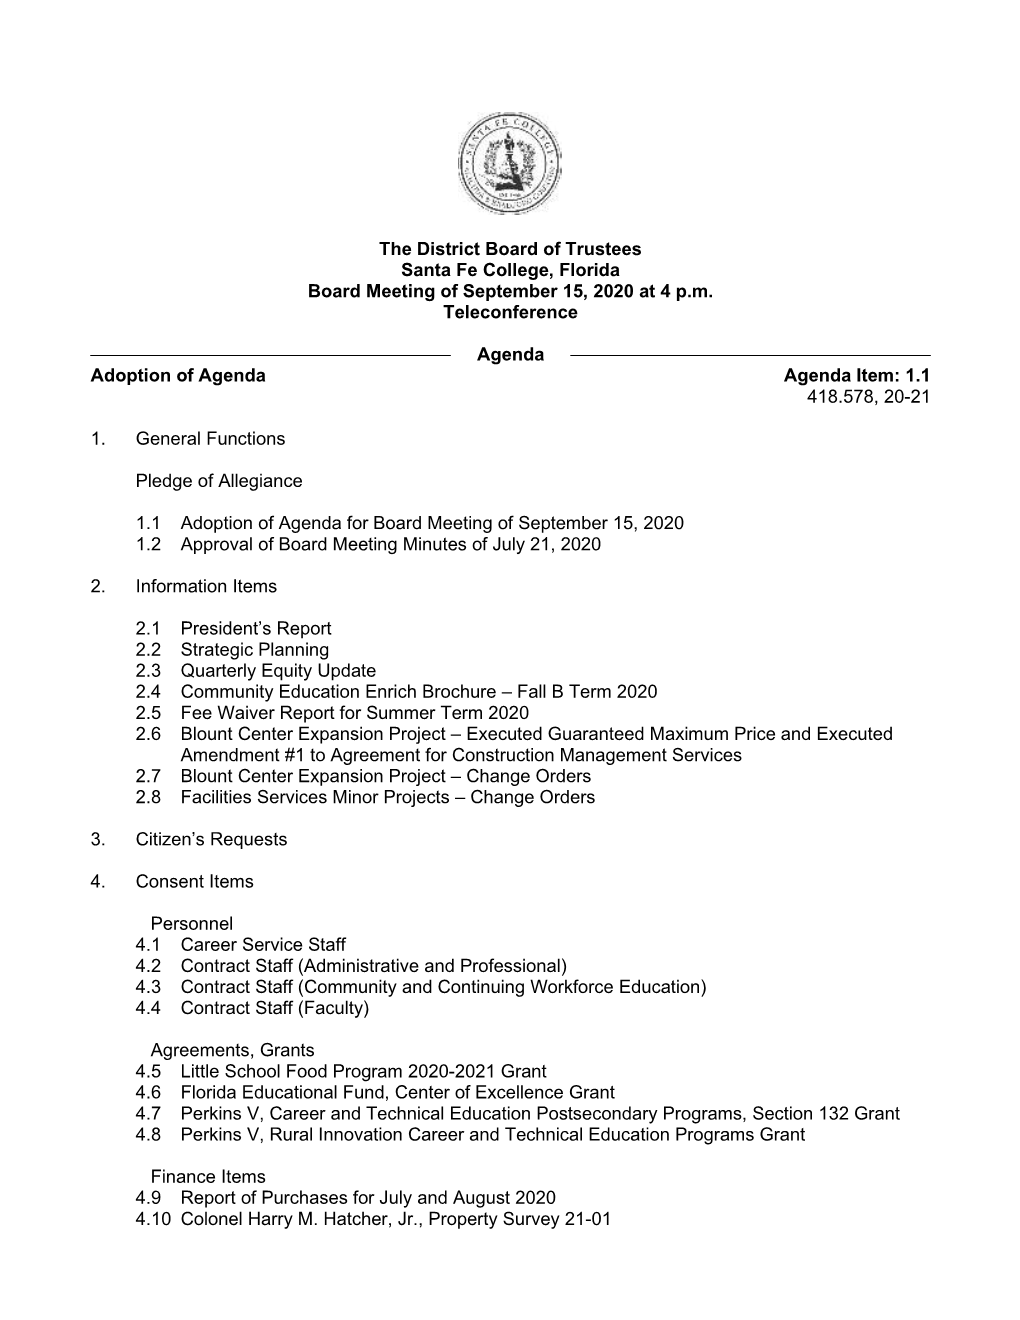 The District Board of Trustees Santa Fe College, Florida Board Meeting of September 15, 2020 at 4 P.M